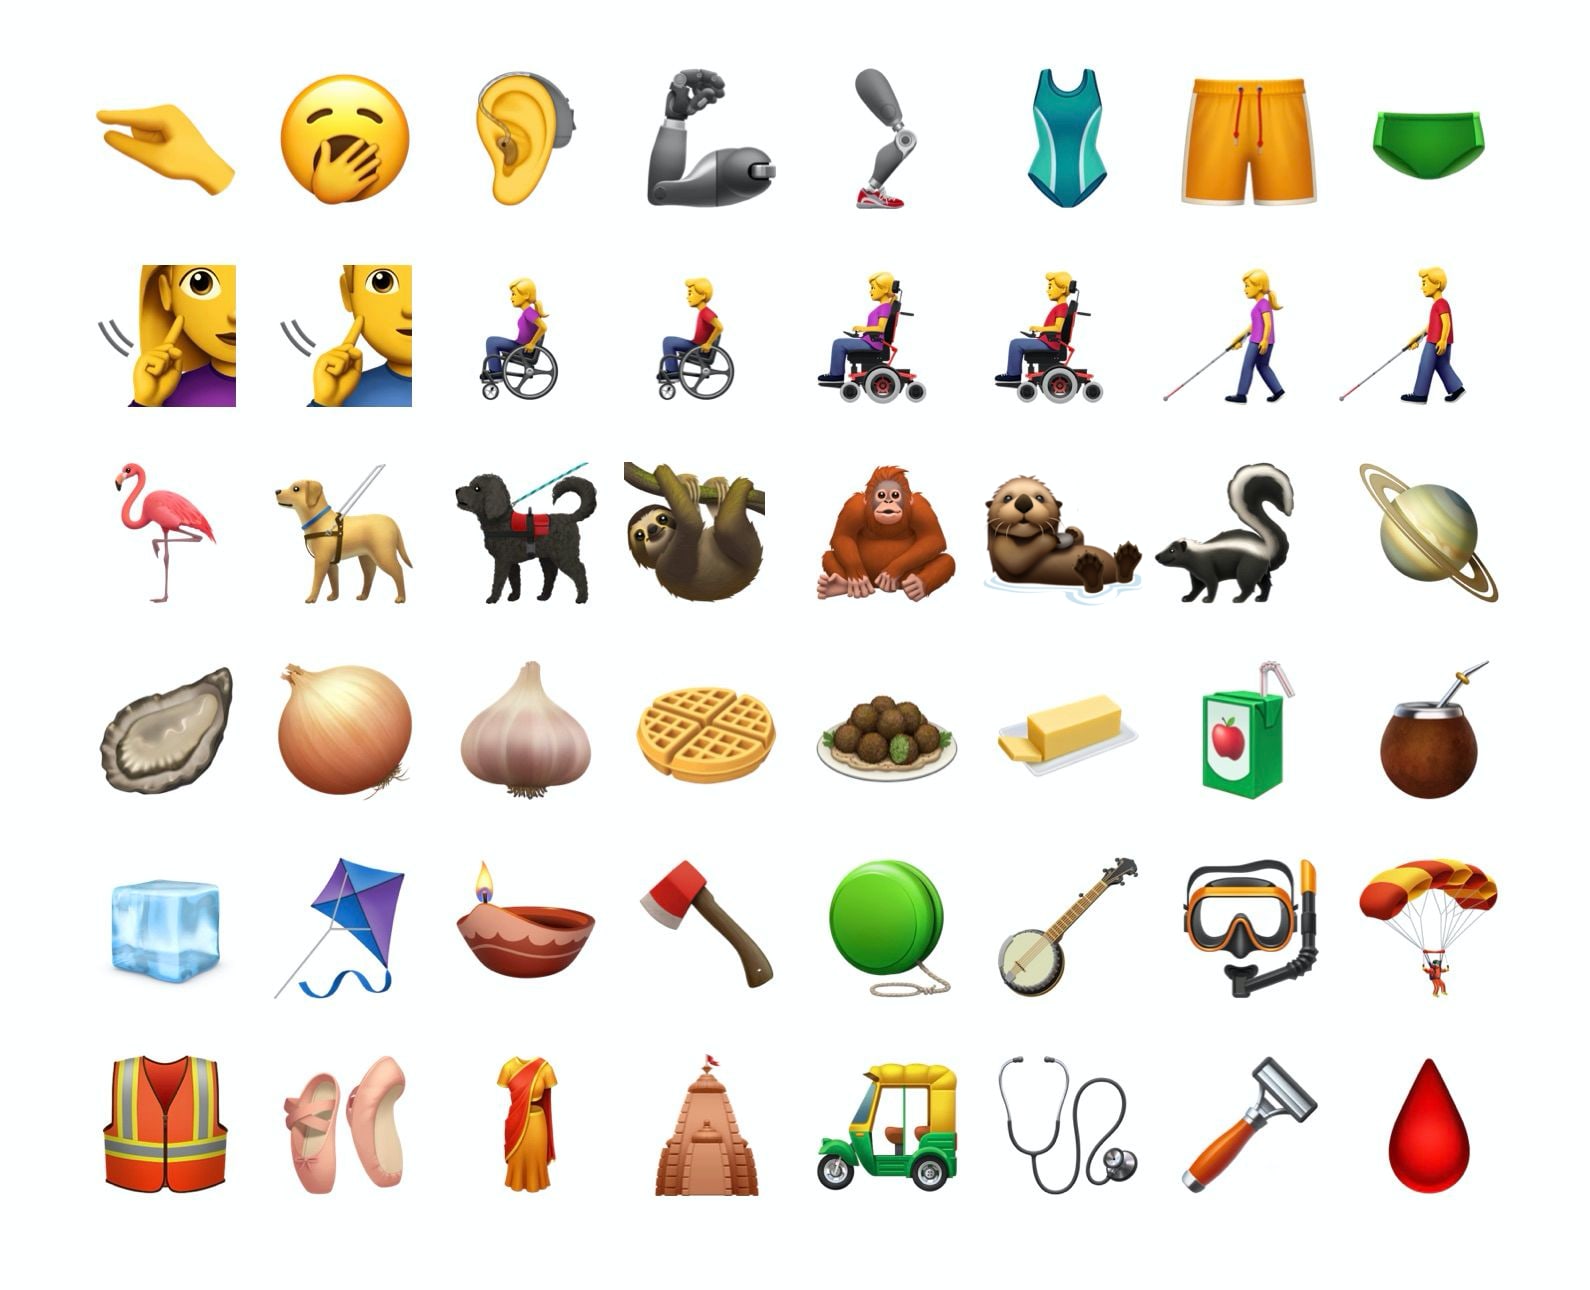 First Look New Emojis in iOS 13.2